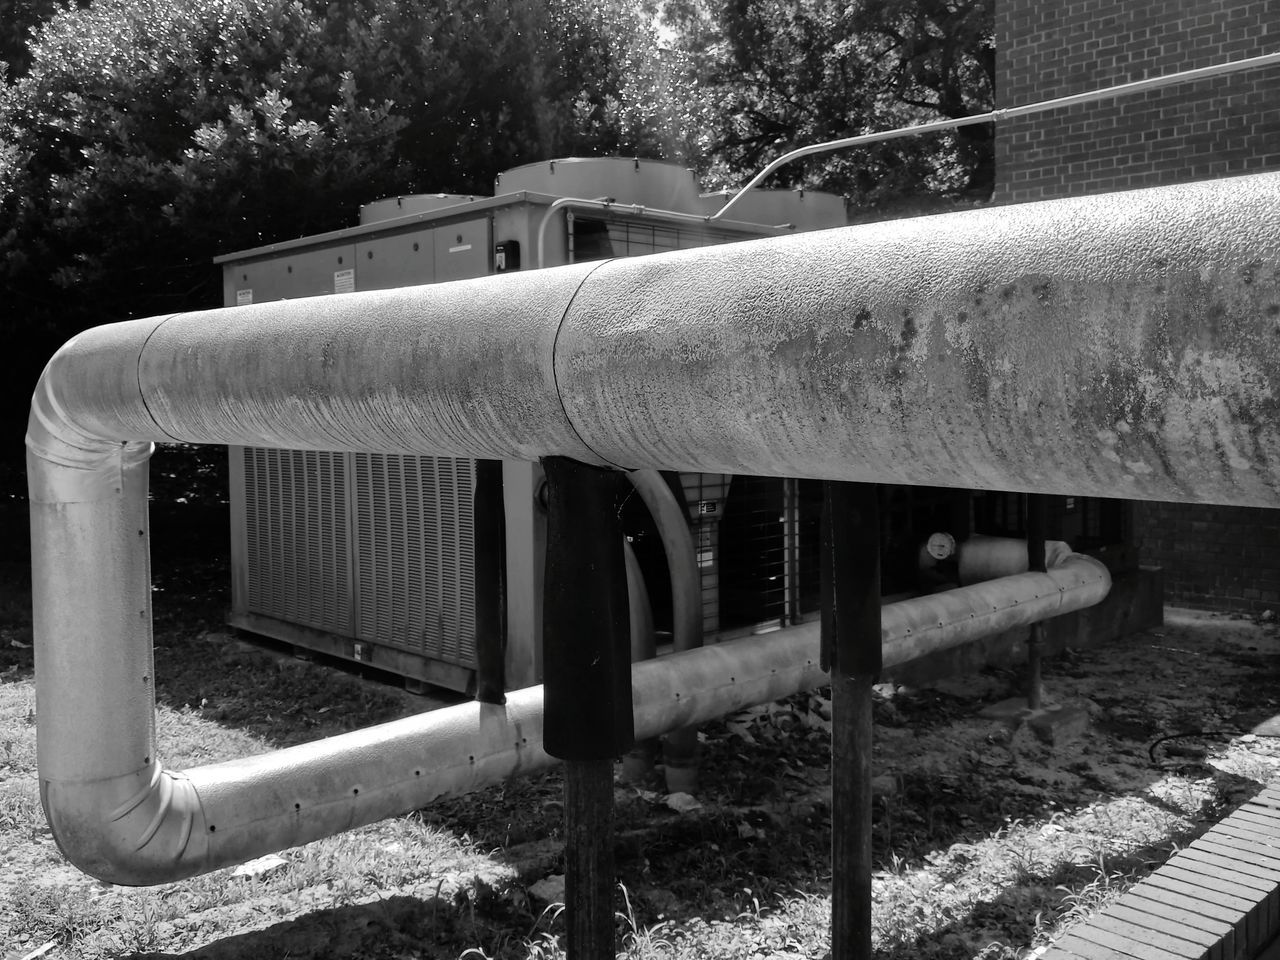 black and white, metal, day, nature, plant, monochrome photography, no people, tree, pipeline transport, monochrome, outdoors, transport, architecture, park, playground, vehicle, pipe - tube, iron, park - man made space